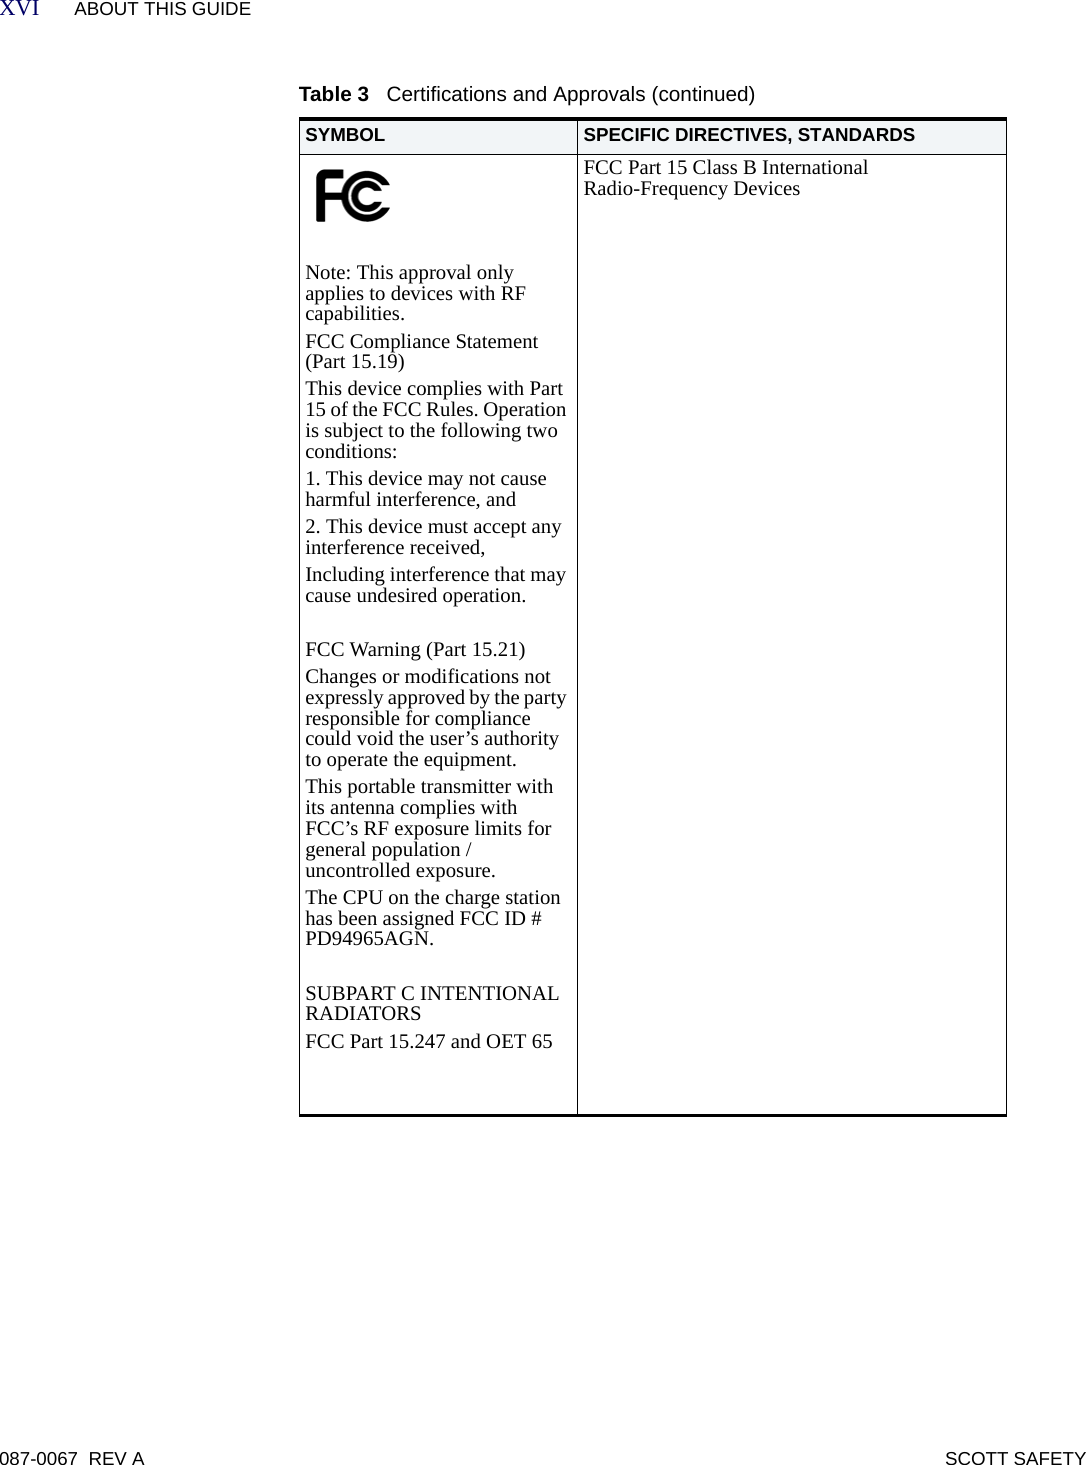 XVI ABOUT THIS GUIDE087-0067 REV A SCOTT SAFETYNote: This approval only applies to devices with RF capabilities. FCC Compliance Statement (Part 15.19) This device complies with Part 15 of the FCC Rules. Operation is subject to the following two conditions:1. This device may not cause harmful interference, and 2. This device must accept any interference received,Including interference that may cause undesired operation.FCC Warning (Part 15.21)Changes or modifications not expressly approved by the party responsible for compliance could void the user’s authority to operate the equipment.This portable transmitter with its antenna complies with FCC’s RF exposure limits for general population / uncontrolled exposure.The CPU on the charge station has been assigned FCC ID # PD94965AGN. SUBPART C INTENTIONAL RADIATORS FCC Part 15.247 and OET 65 FCC Part 15 Class B International Radio-Frequency Devices Table 3   Certifications and Approvals (continued)SYMBOL SPECIFIC DIRECTIVES, STANDARDS